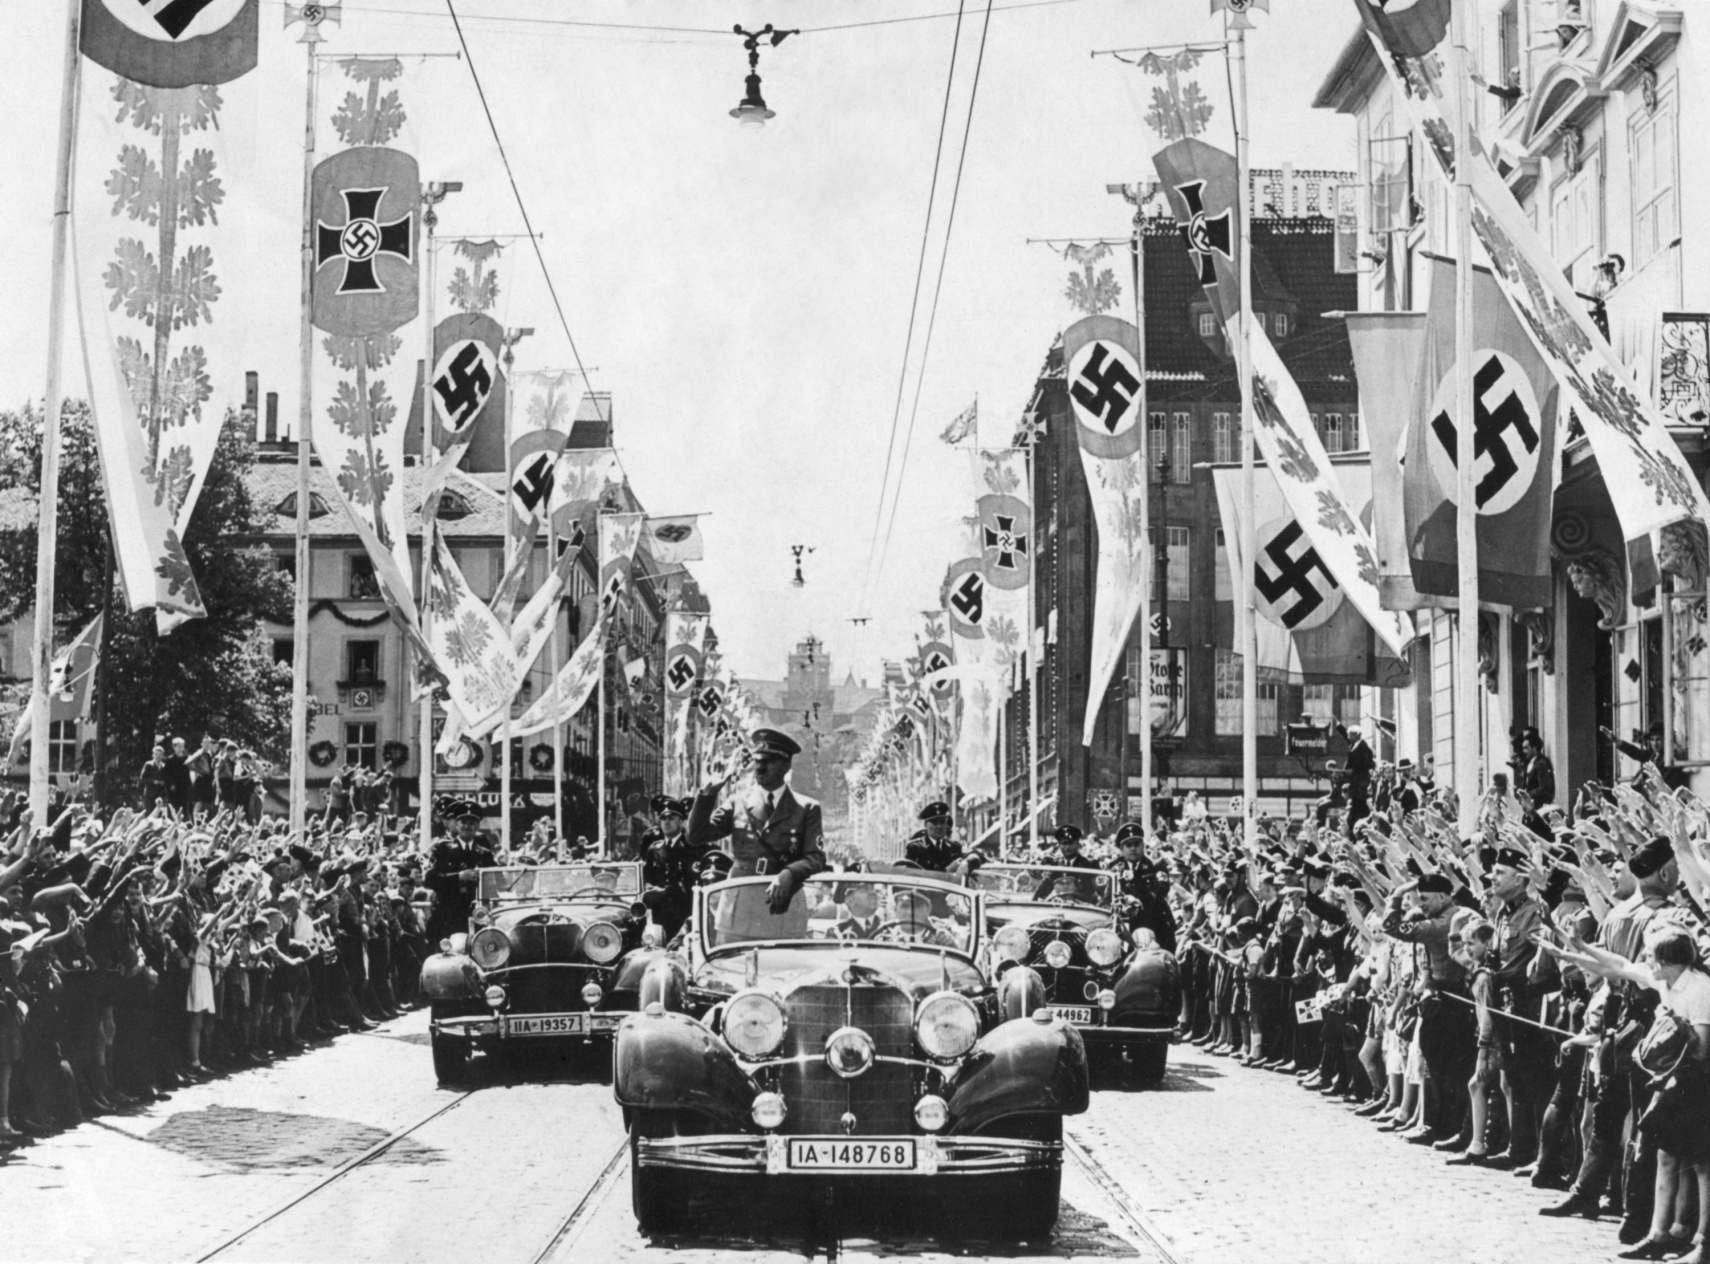 Adolf Hitler waving to crowds from his car at the head of a parade. The streets are decorated with various swastika banners. Ca. 1934-38. Hitler had a convenient but spurious reason for choosing the swastika symbol as their insignia. It had been used by the Aryan nomads of India in the second millennium. In Nazi theory, the Aryans were of German ancestry, and Hitler concluded that the swastika had been eternally anti-semitic.